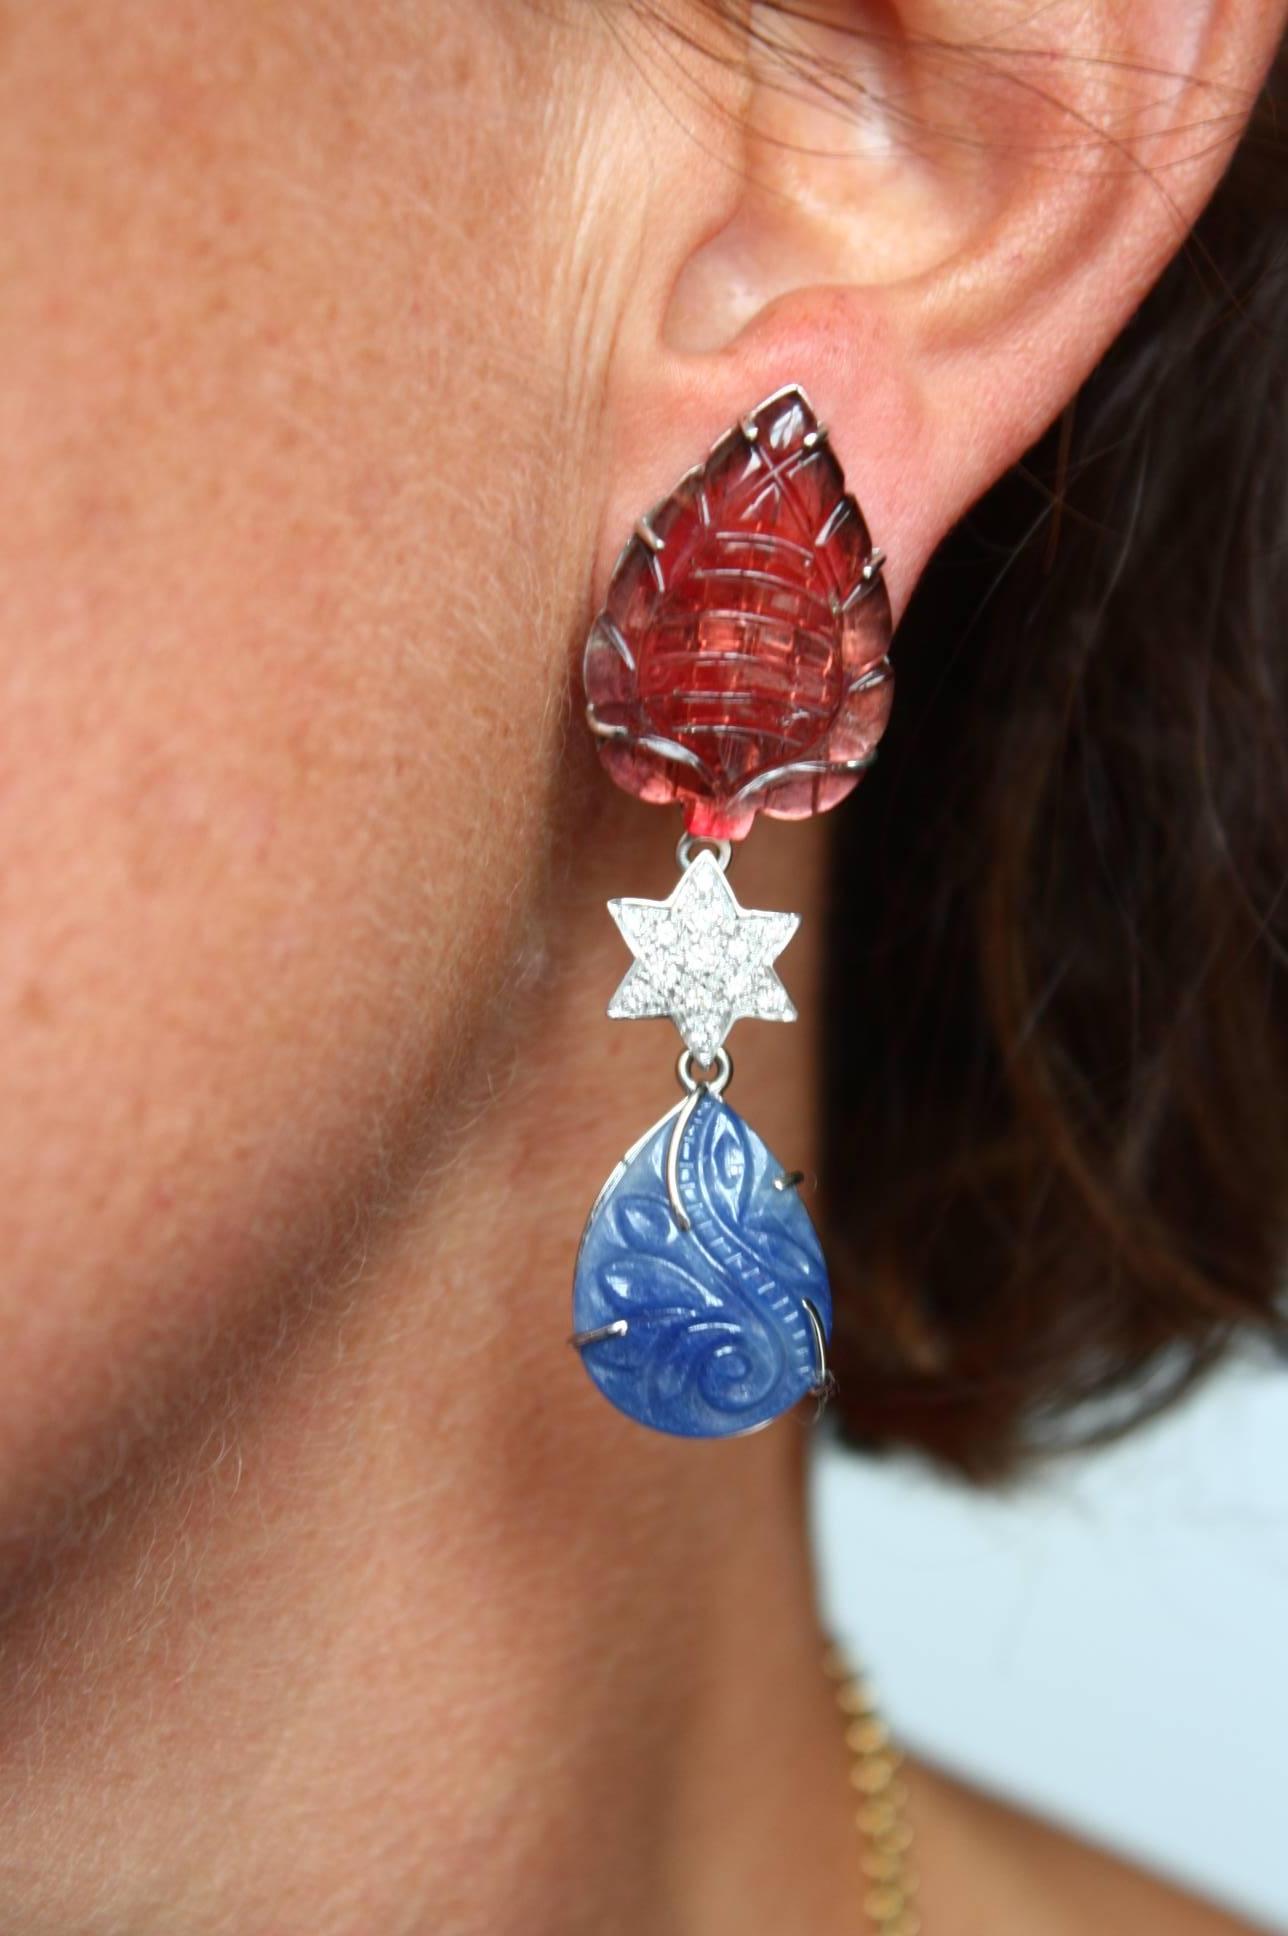 Carved drops pink tourmaline and sapphire with a star in diamonds Cts 1,10 to connect the 2 elements. White gold 12gr total length 5,5 cm weight 8,9 gr. each.
All Giulia Colussi jewelry is new and has never been previously owned or worn. Each item